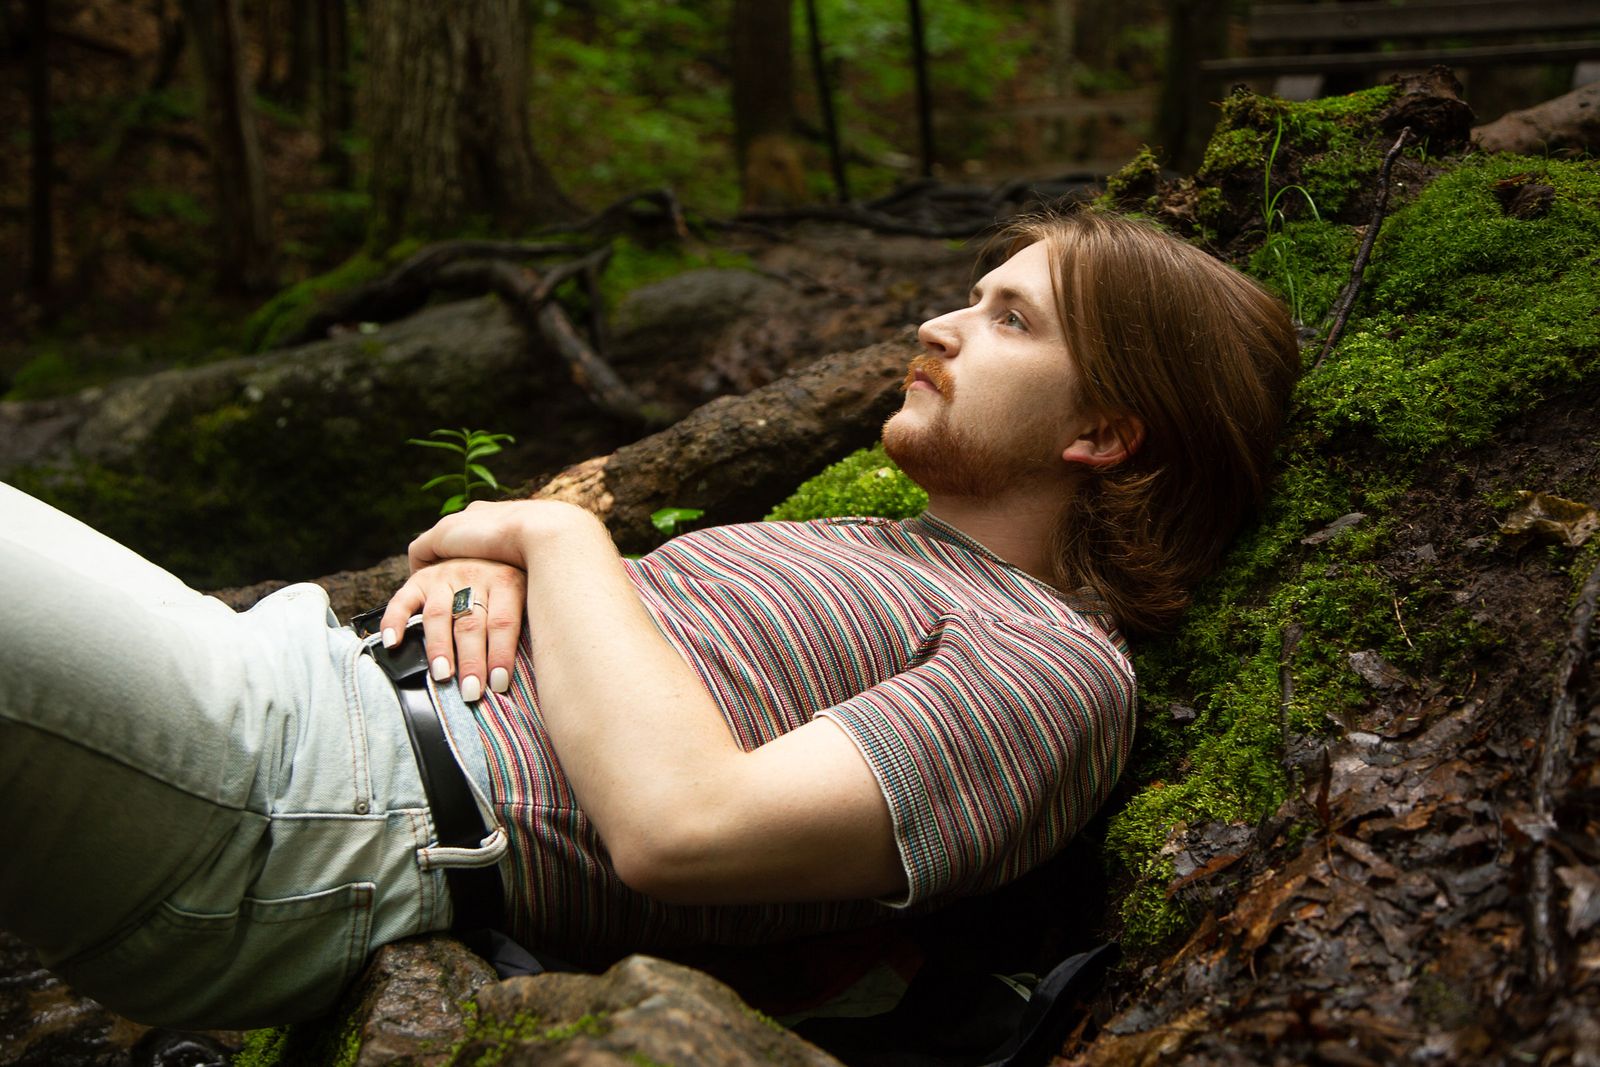 © Lindsay Morris - Danny relaxes on moss-covered boulders after a rigorous hike near his home (2021).